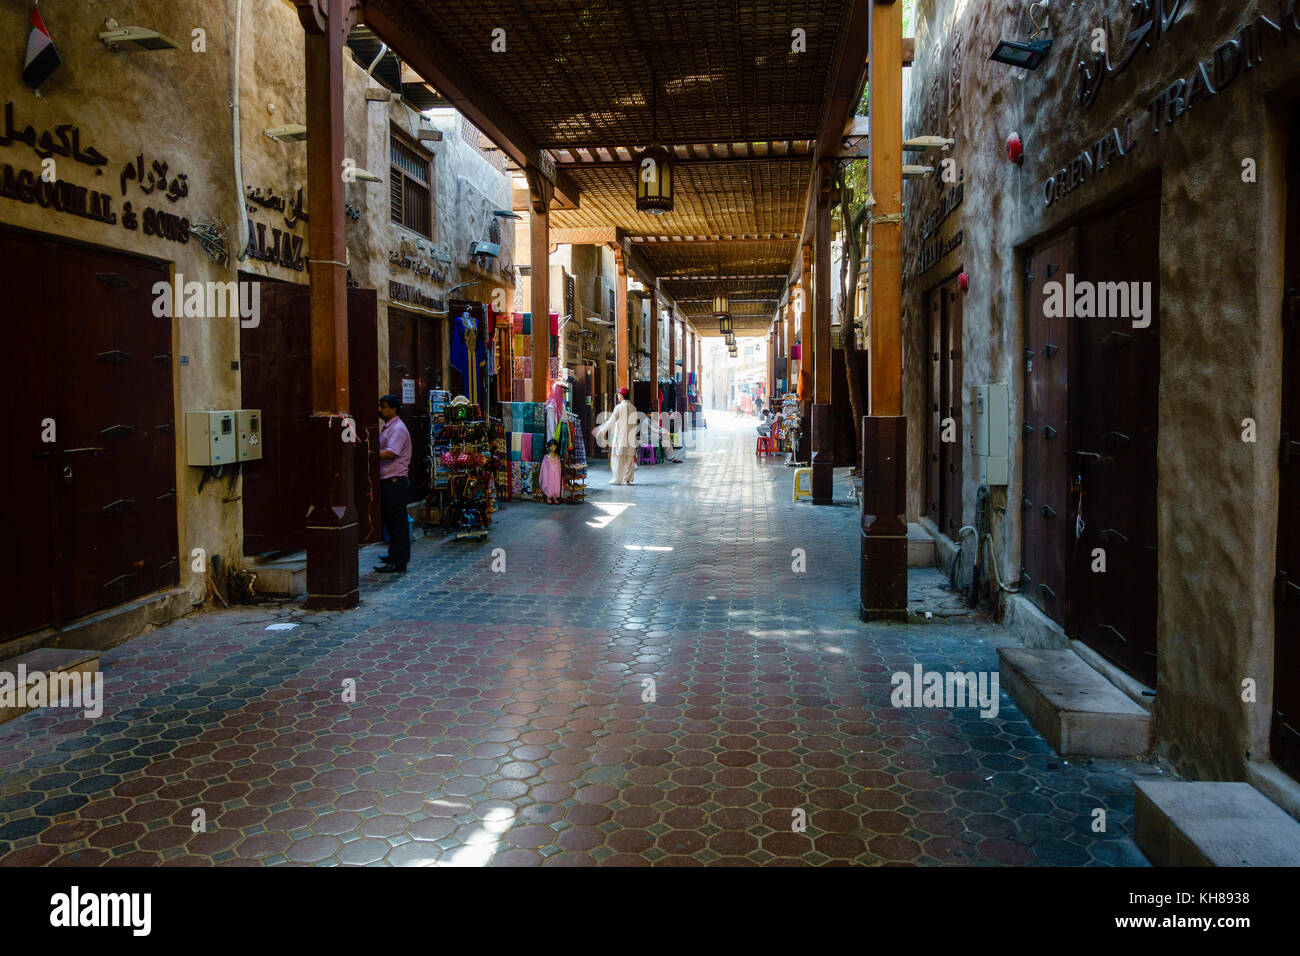 Dubai, UAE, October 7, 2015: Dubai Spice Souk in the Old Town. Many shops are closed during midday. Stock Photo